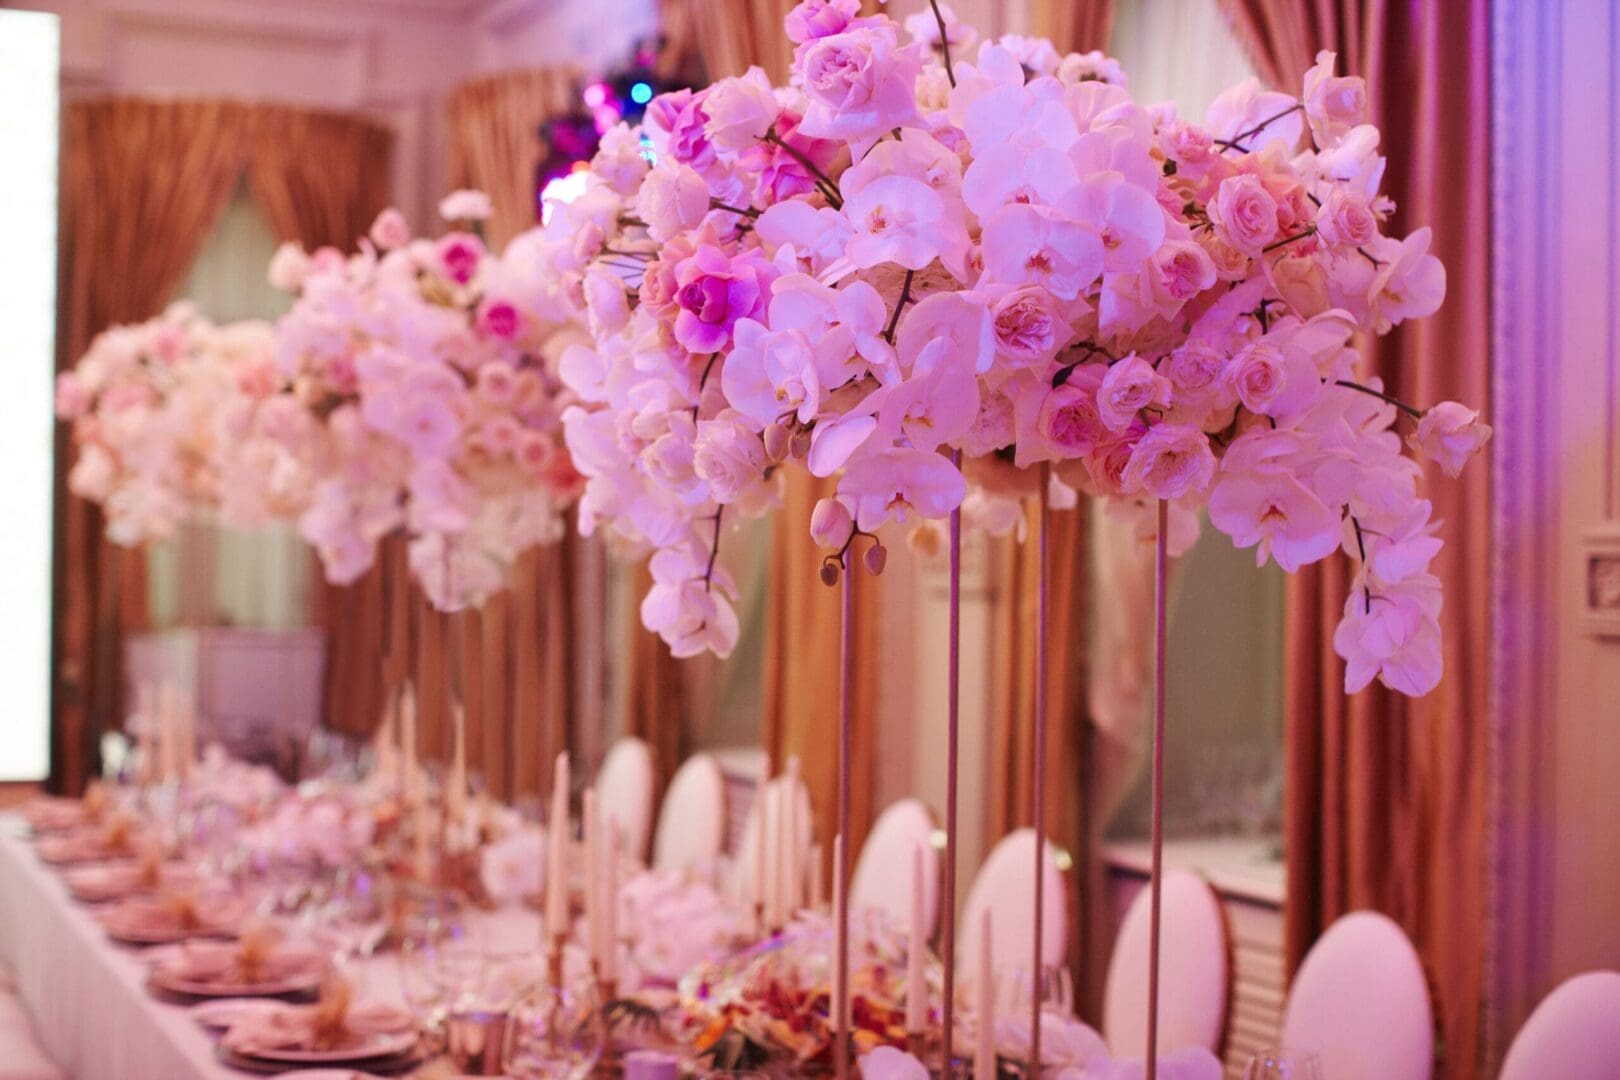 A long table is decorated with pink and white flowers.